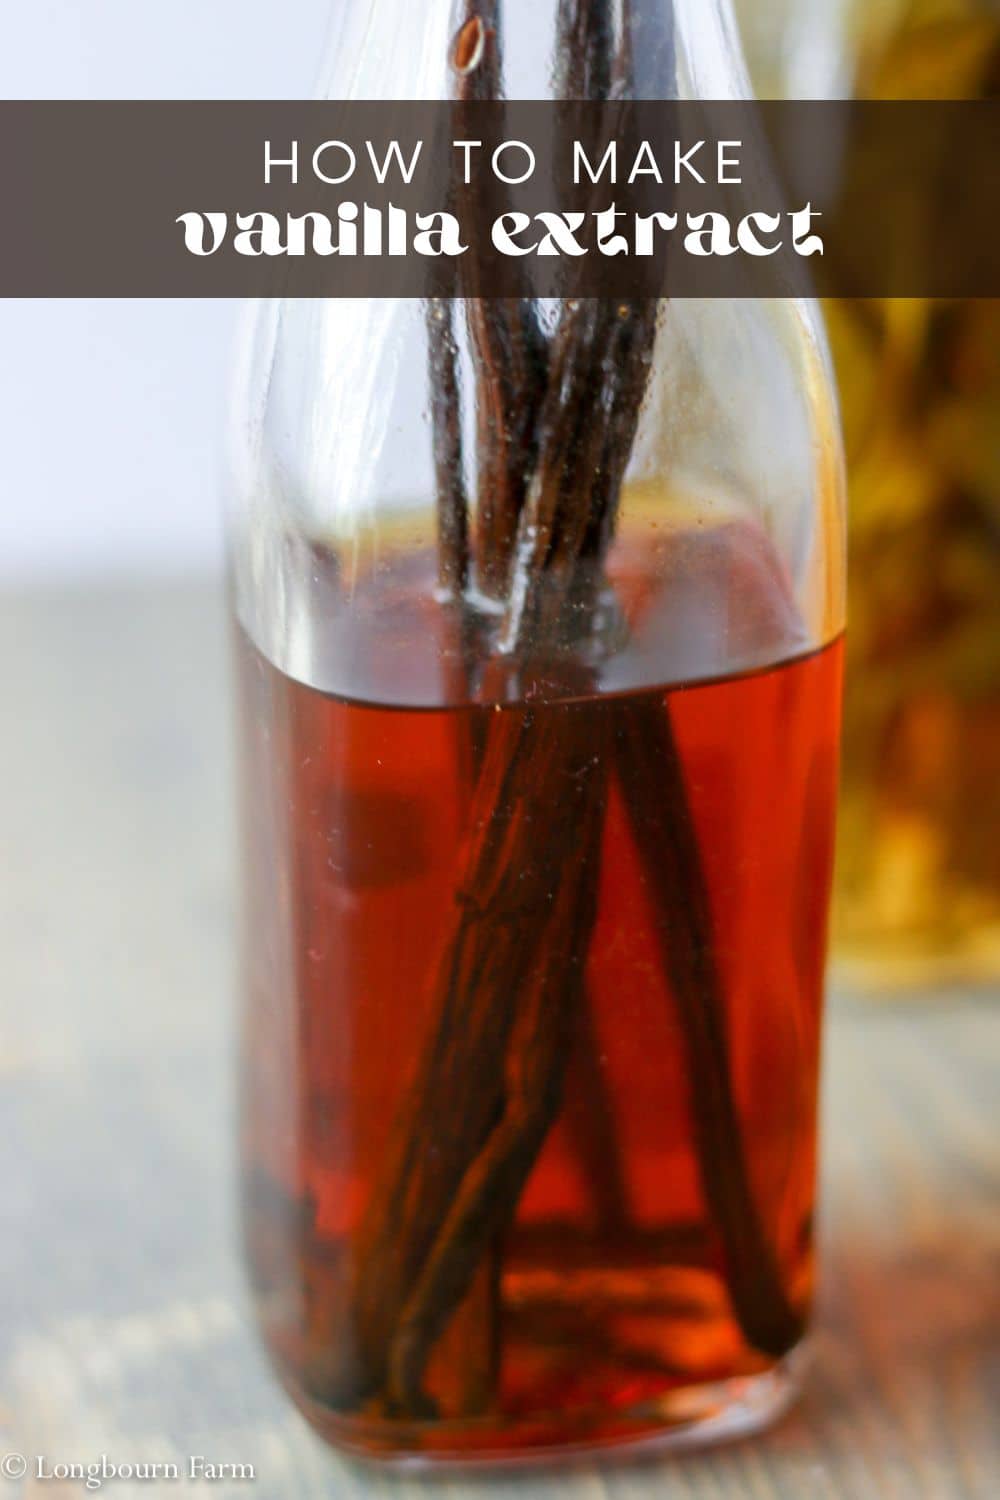 Learn how to make vanilla extract! Very detailed instructions to give you all the information you need. Homemade vanilla extract is easy and fun to make!